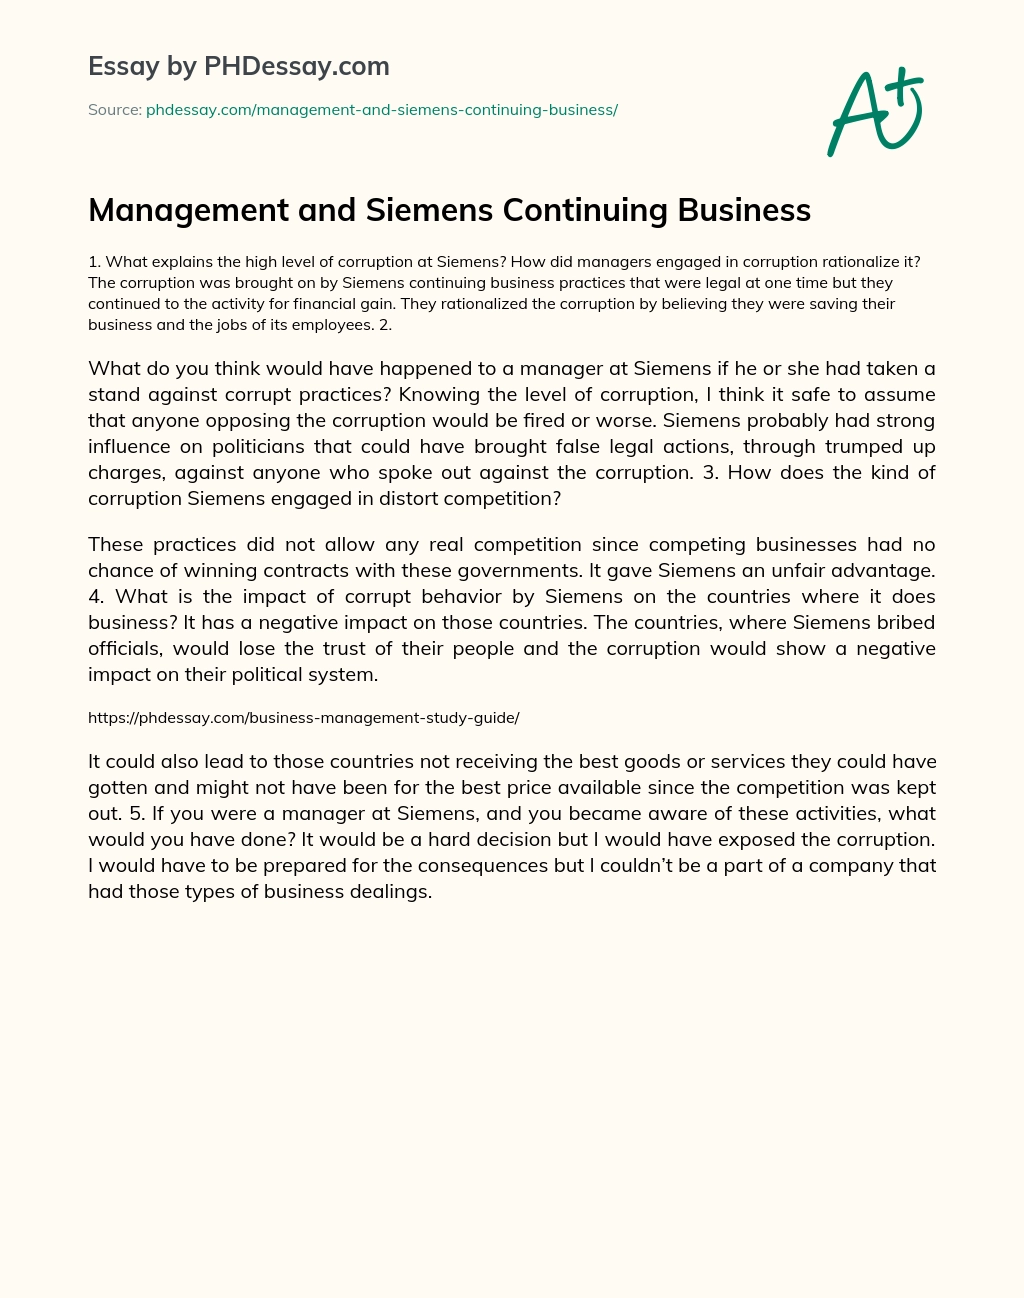 Management and Siemens Continuing Business essay